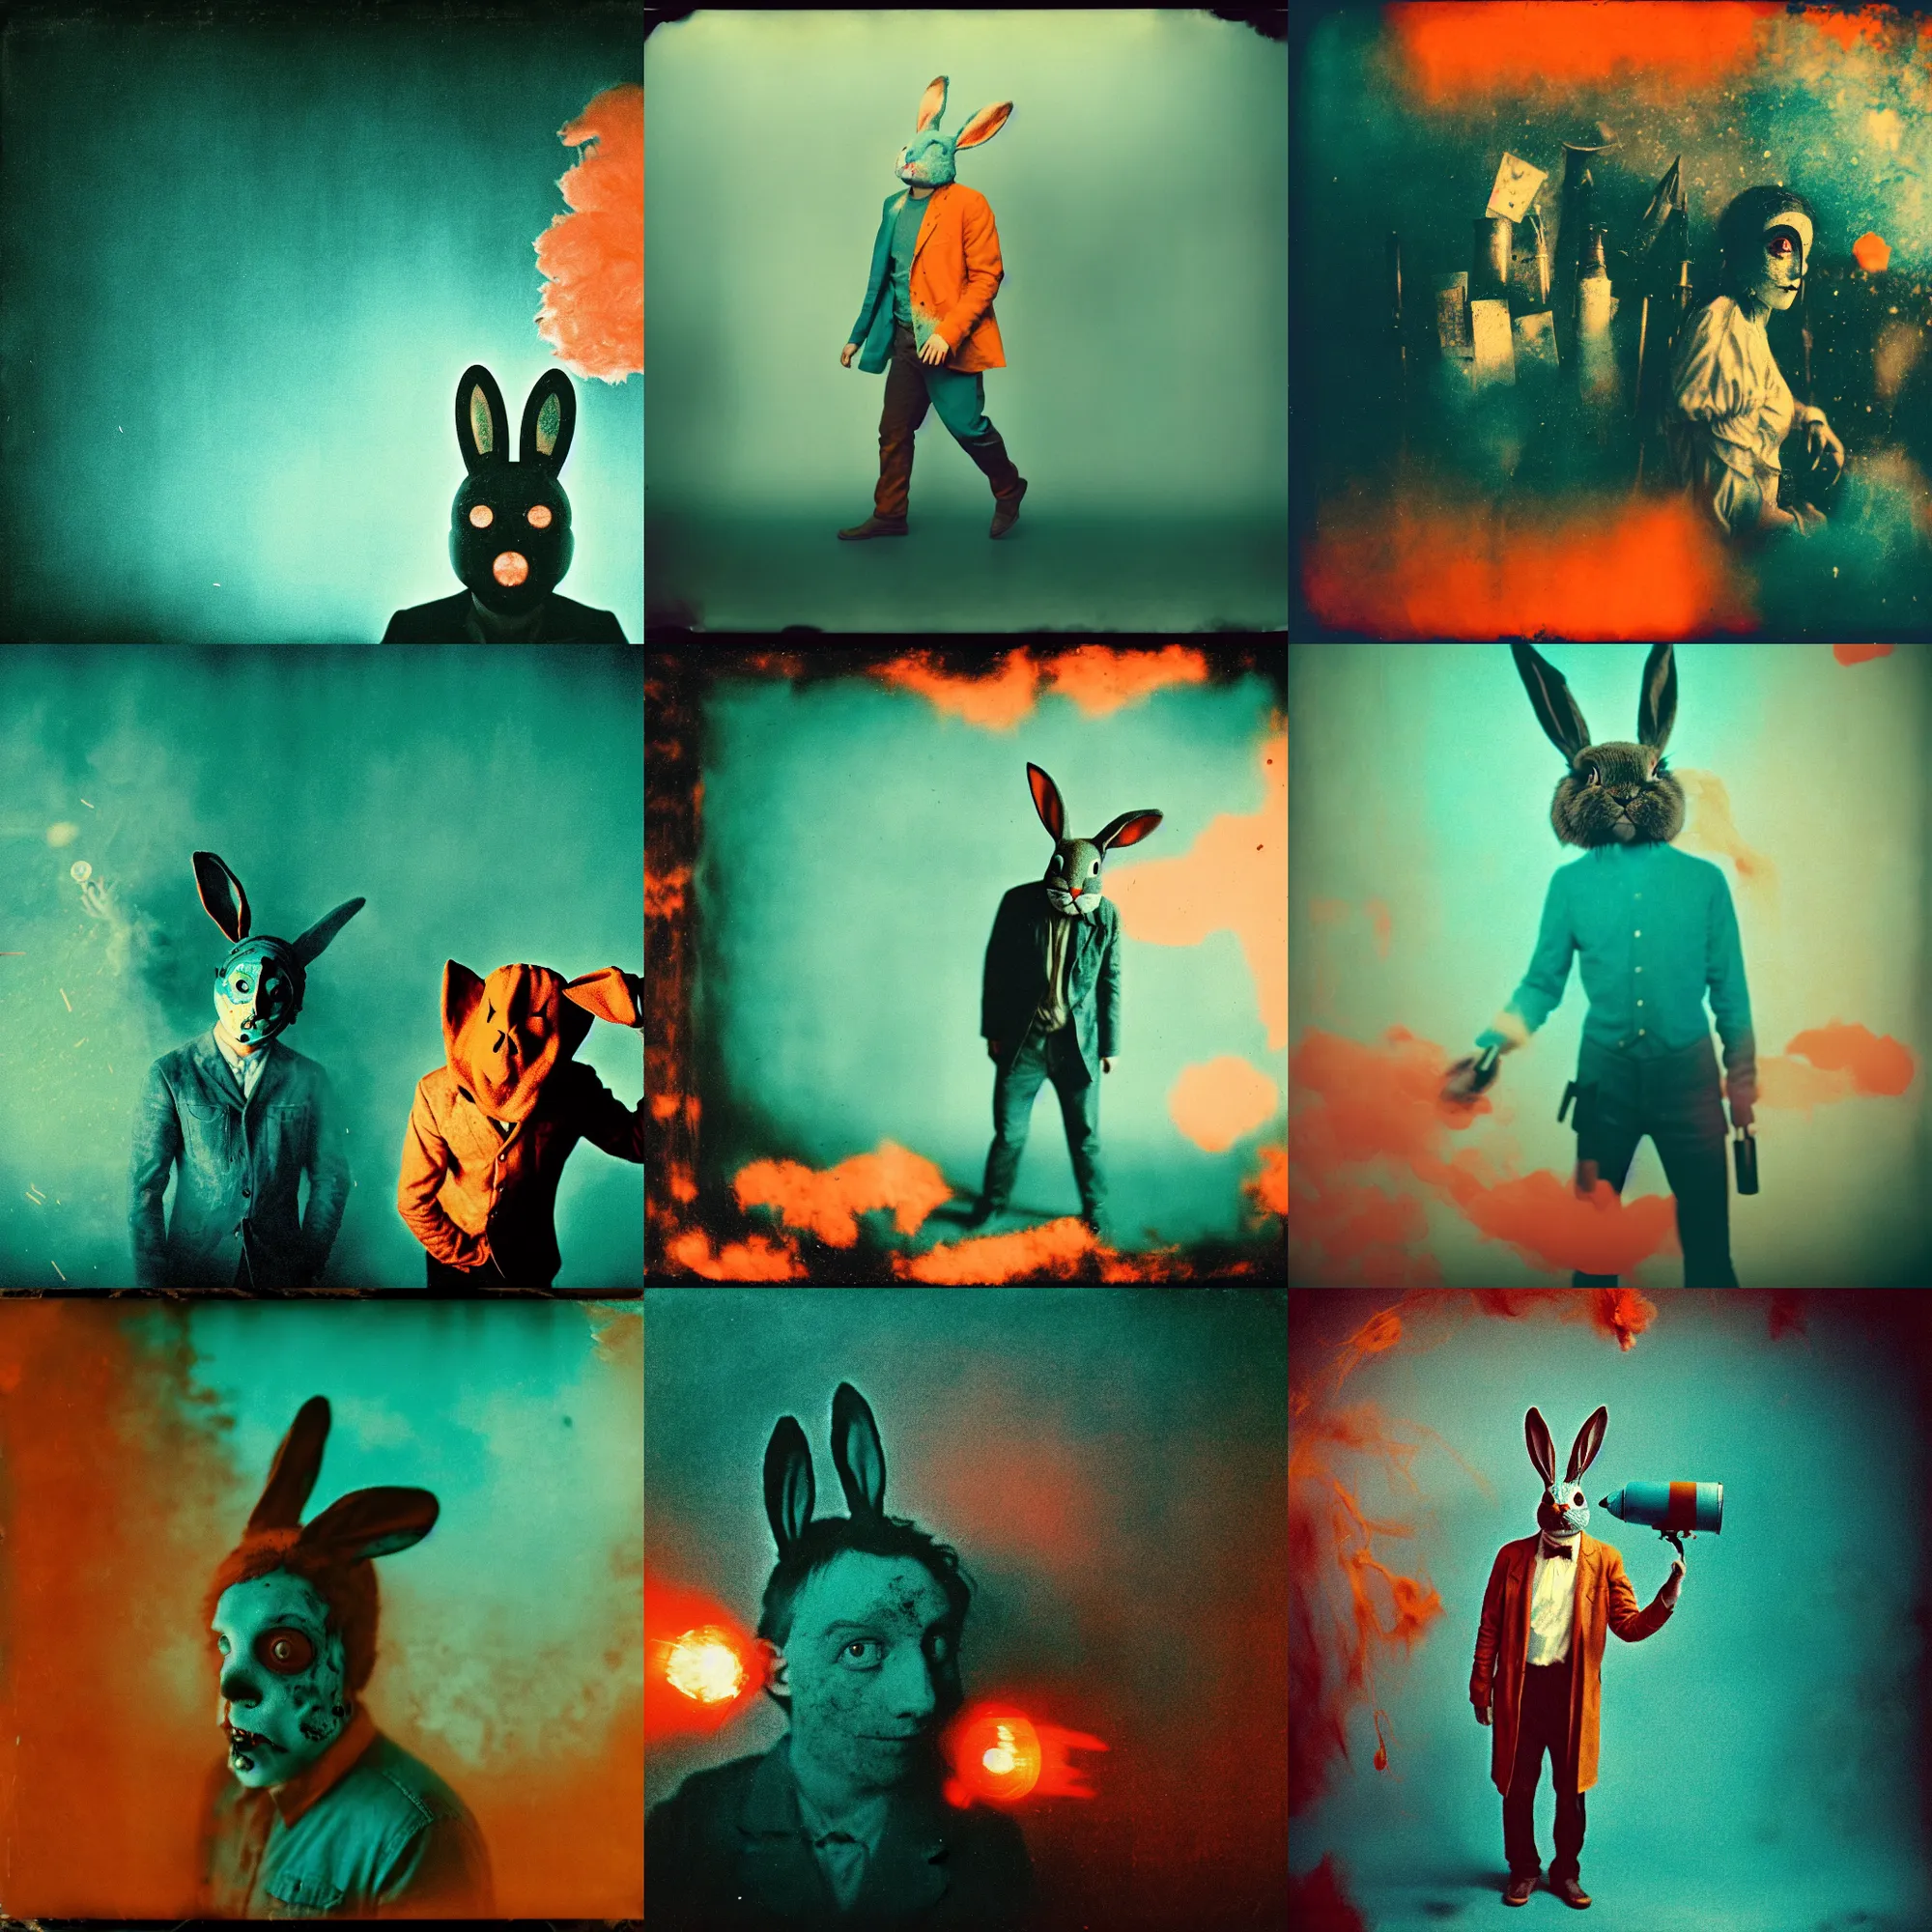 Prompt: kodak portra 4 0 0, wetplate, teal and orange colours, bunny head, the walking dead, 1 9 1 0 s style, motion blur, portrait photo of a backdrop, explosions, rockets, bombs, sparkling, fog, by georges melies and by britt marling